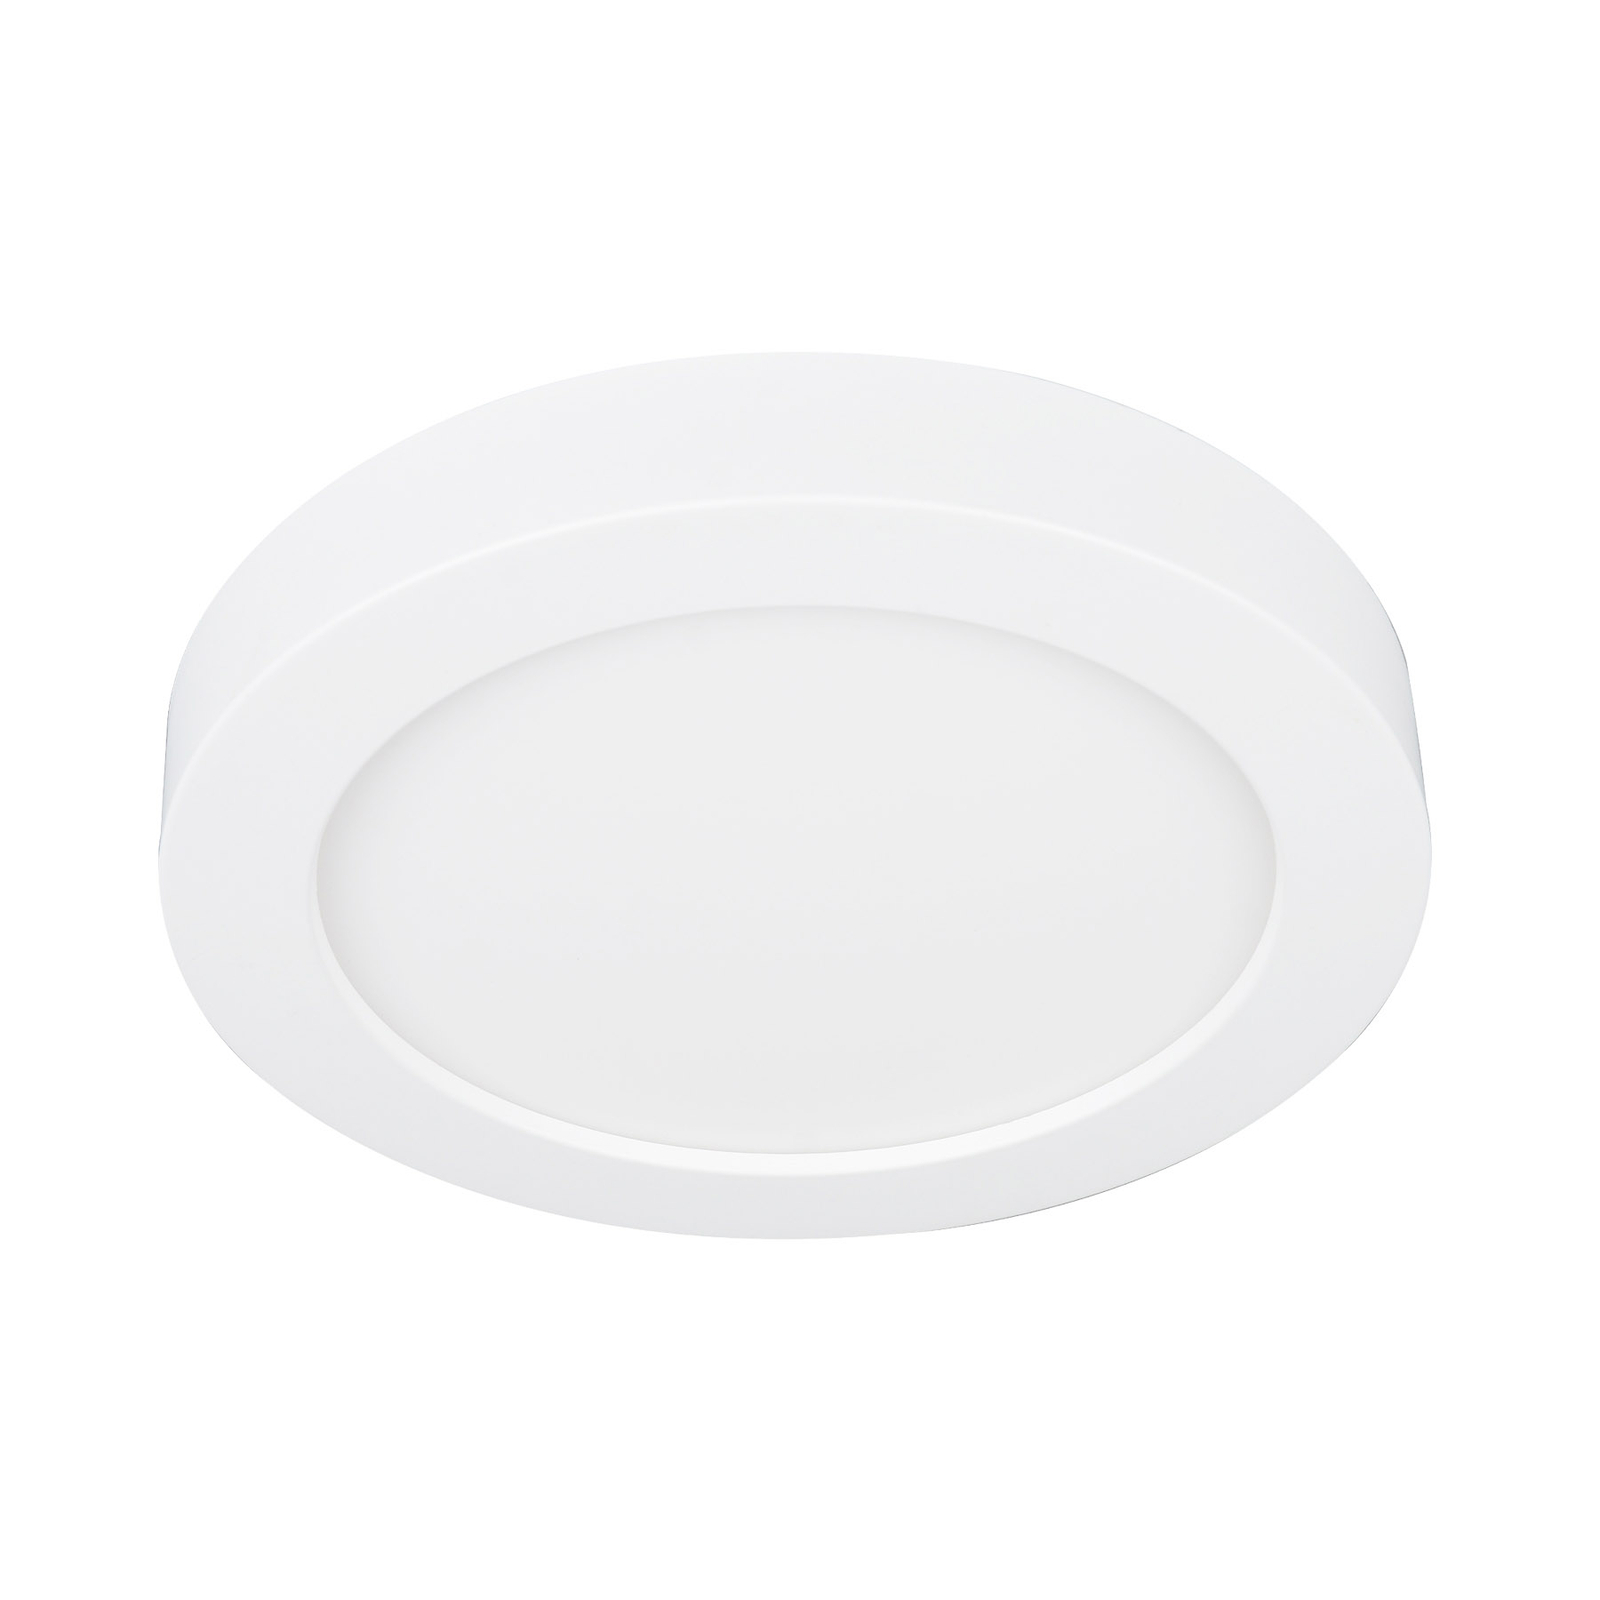 Prios LED ceiling lamp Edwina, white, 17.7cm, 3pcs, dimmable